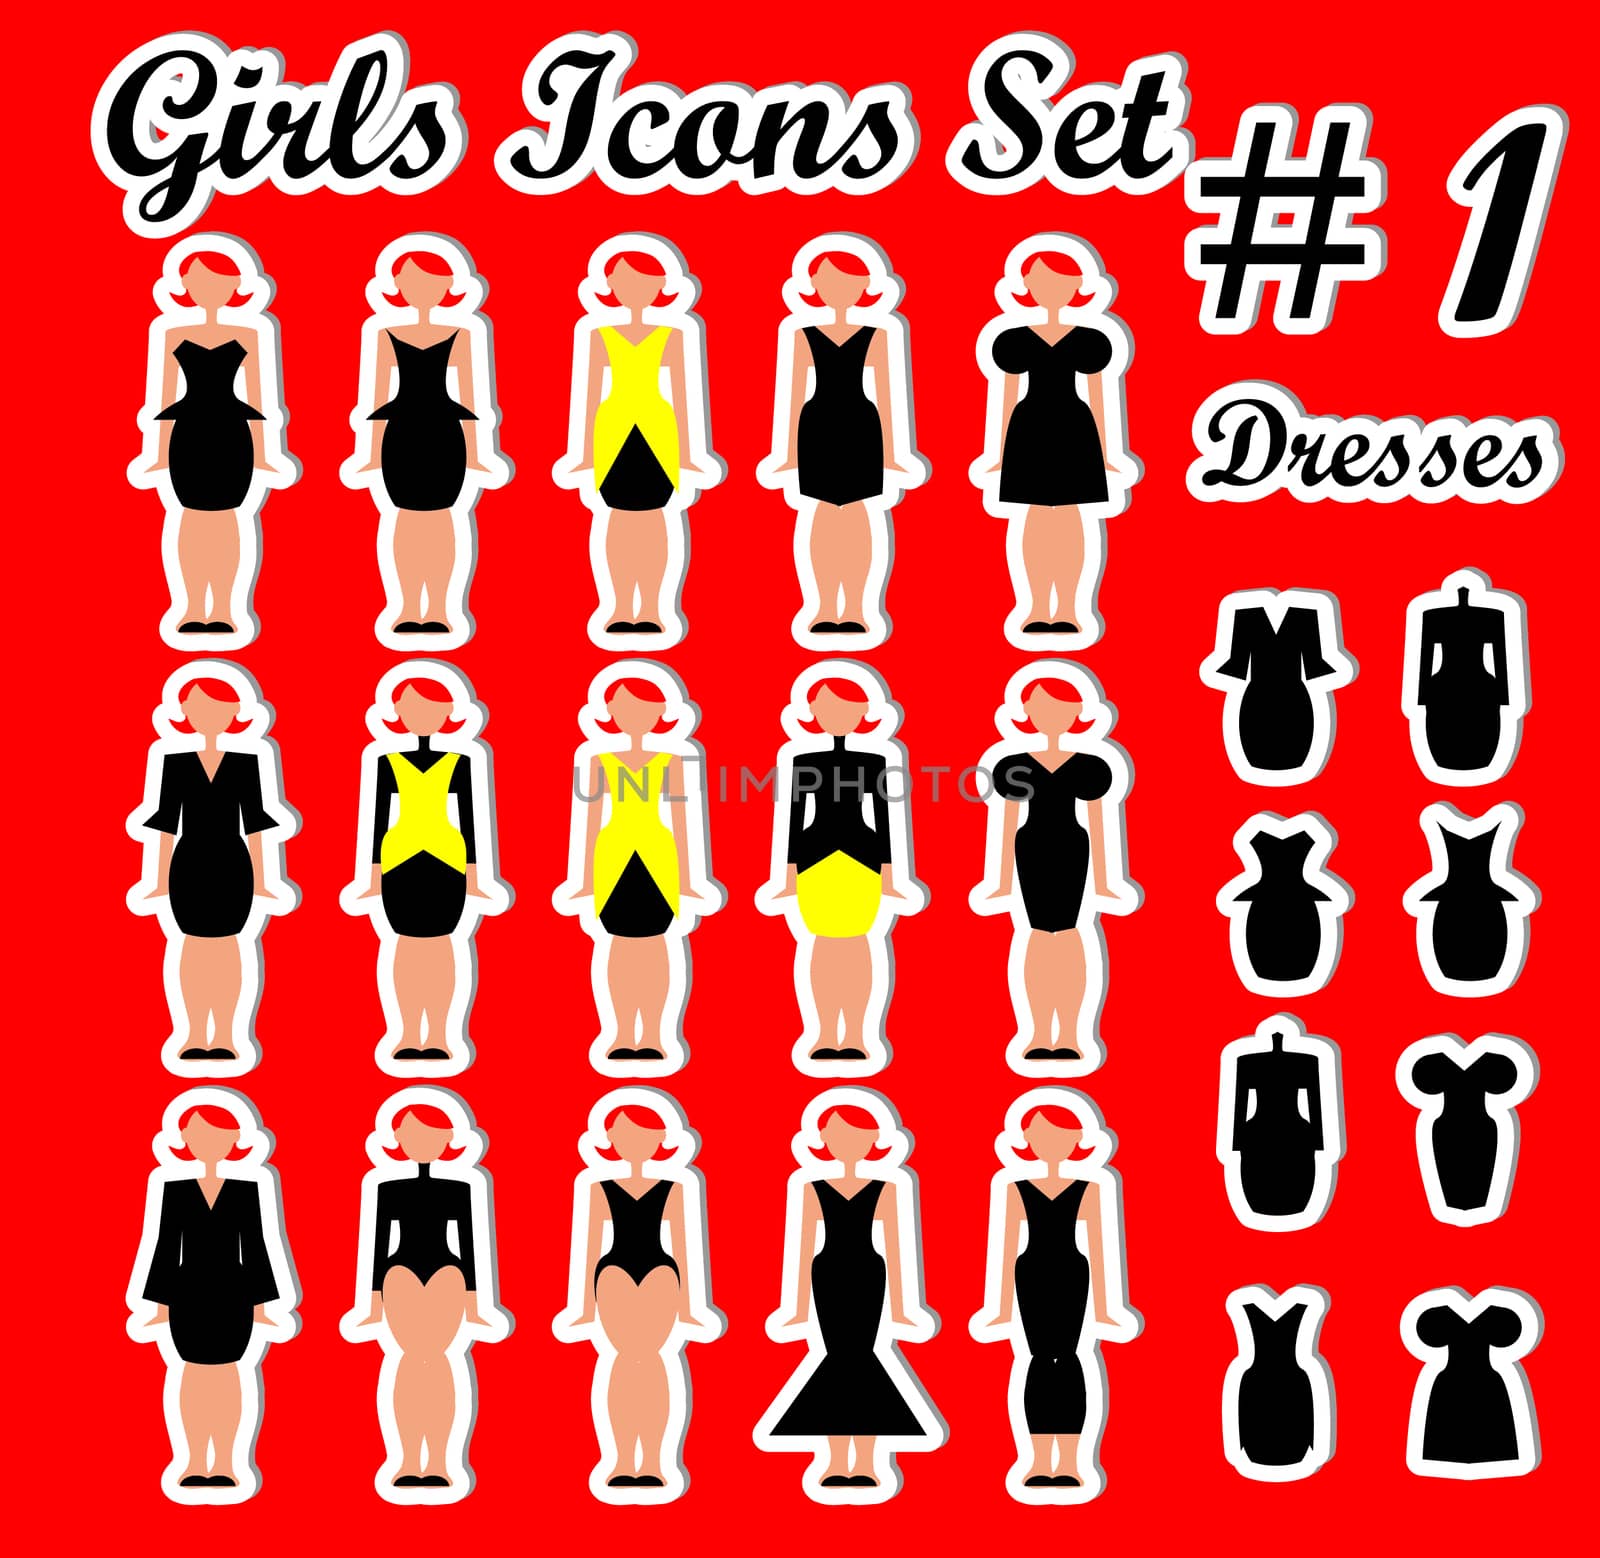 Girls Woman Icons Set 1 dress and people by IconsJewelry